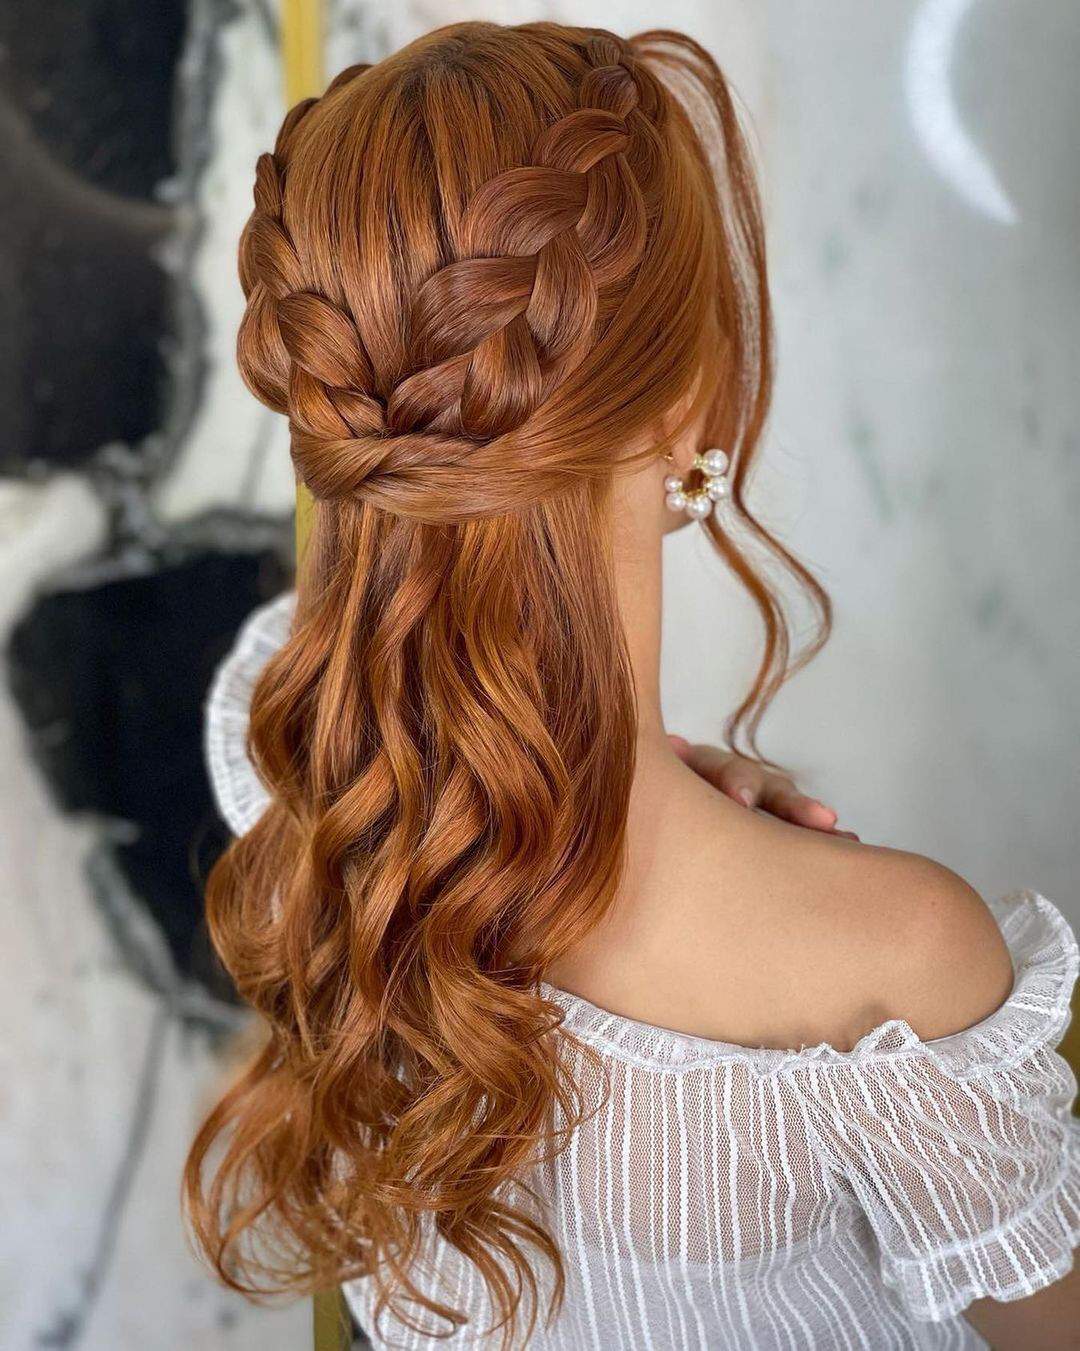 40 Greatest Long Hairstyles For Women With Long Hair In 2021 images 20